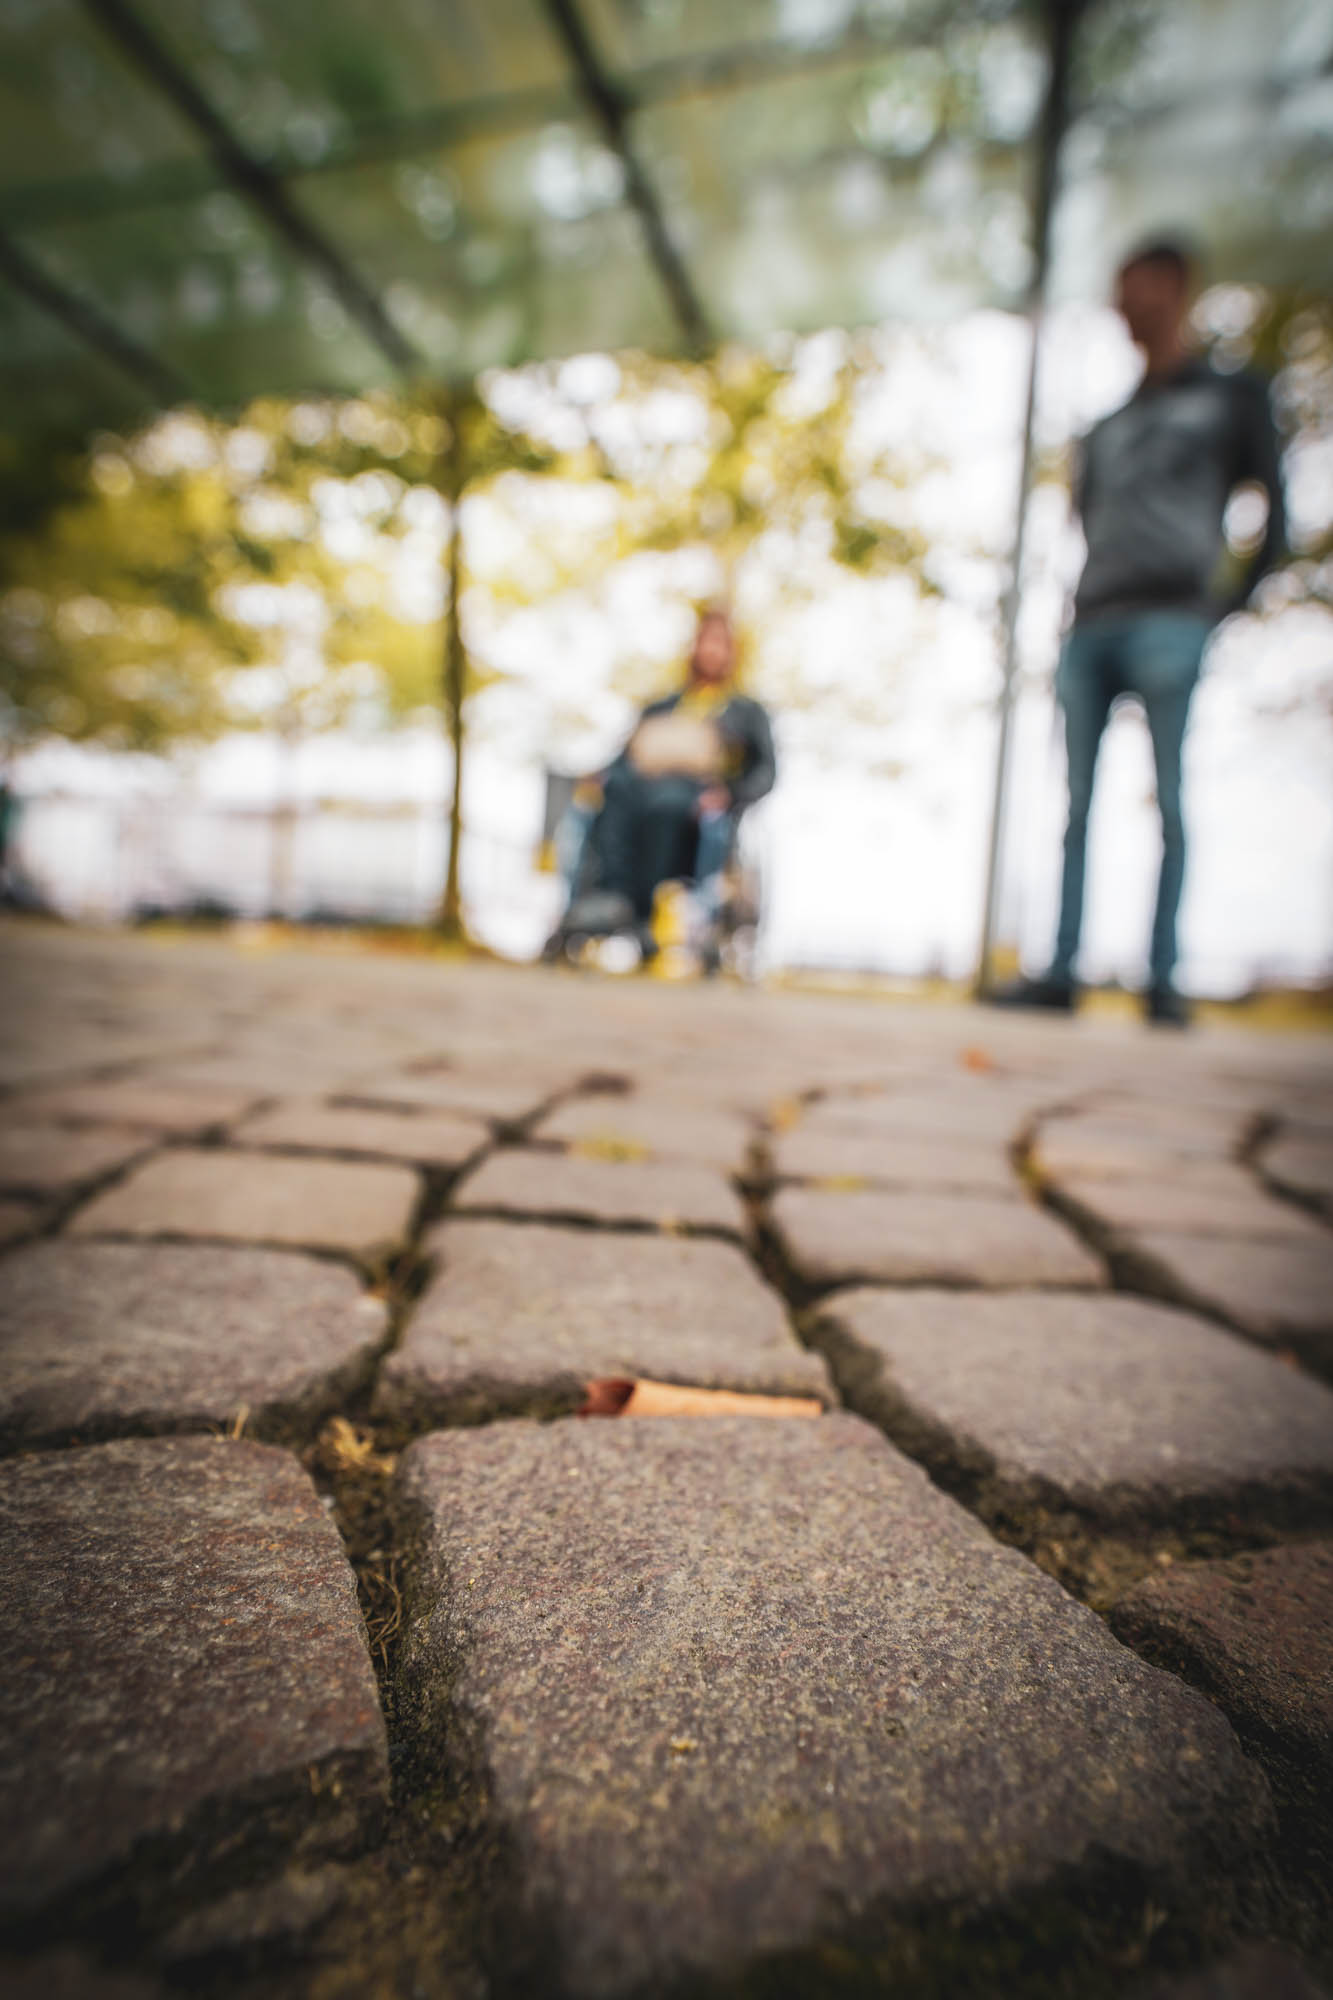 Two people out of focus on cobblestones